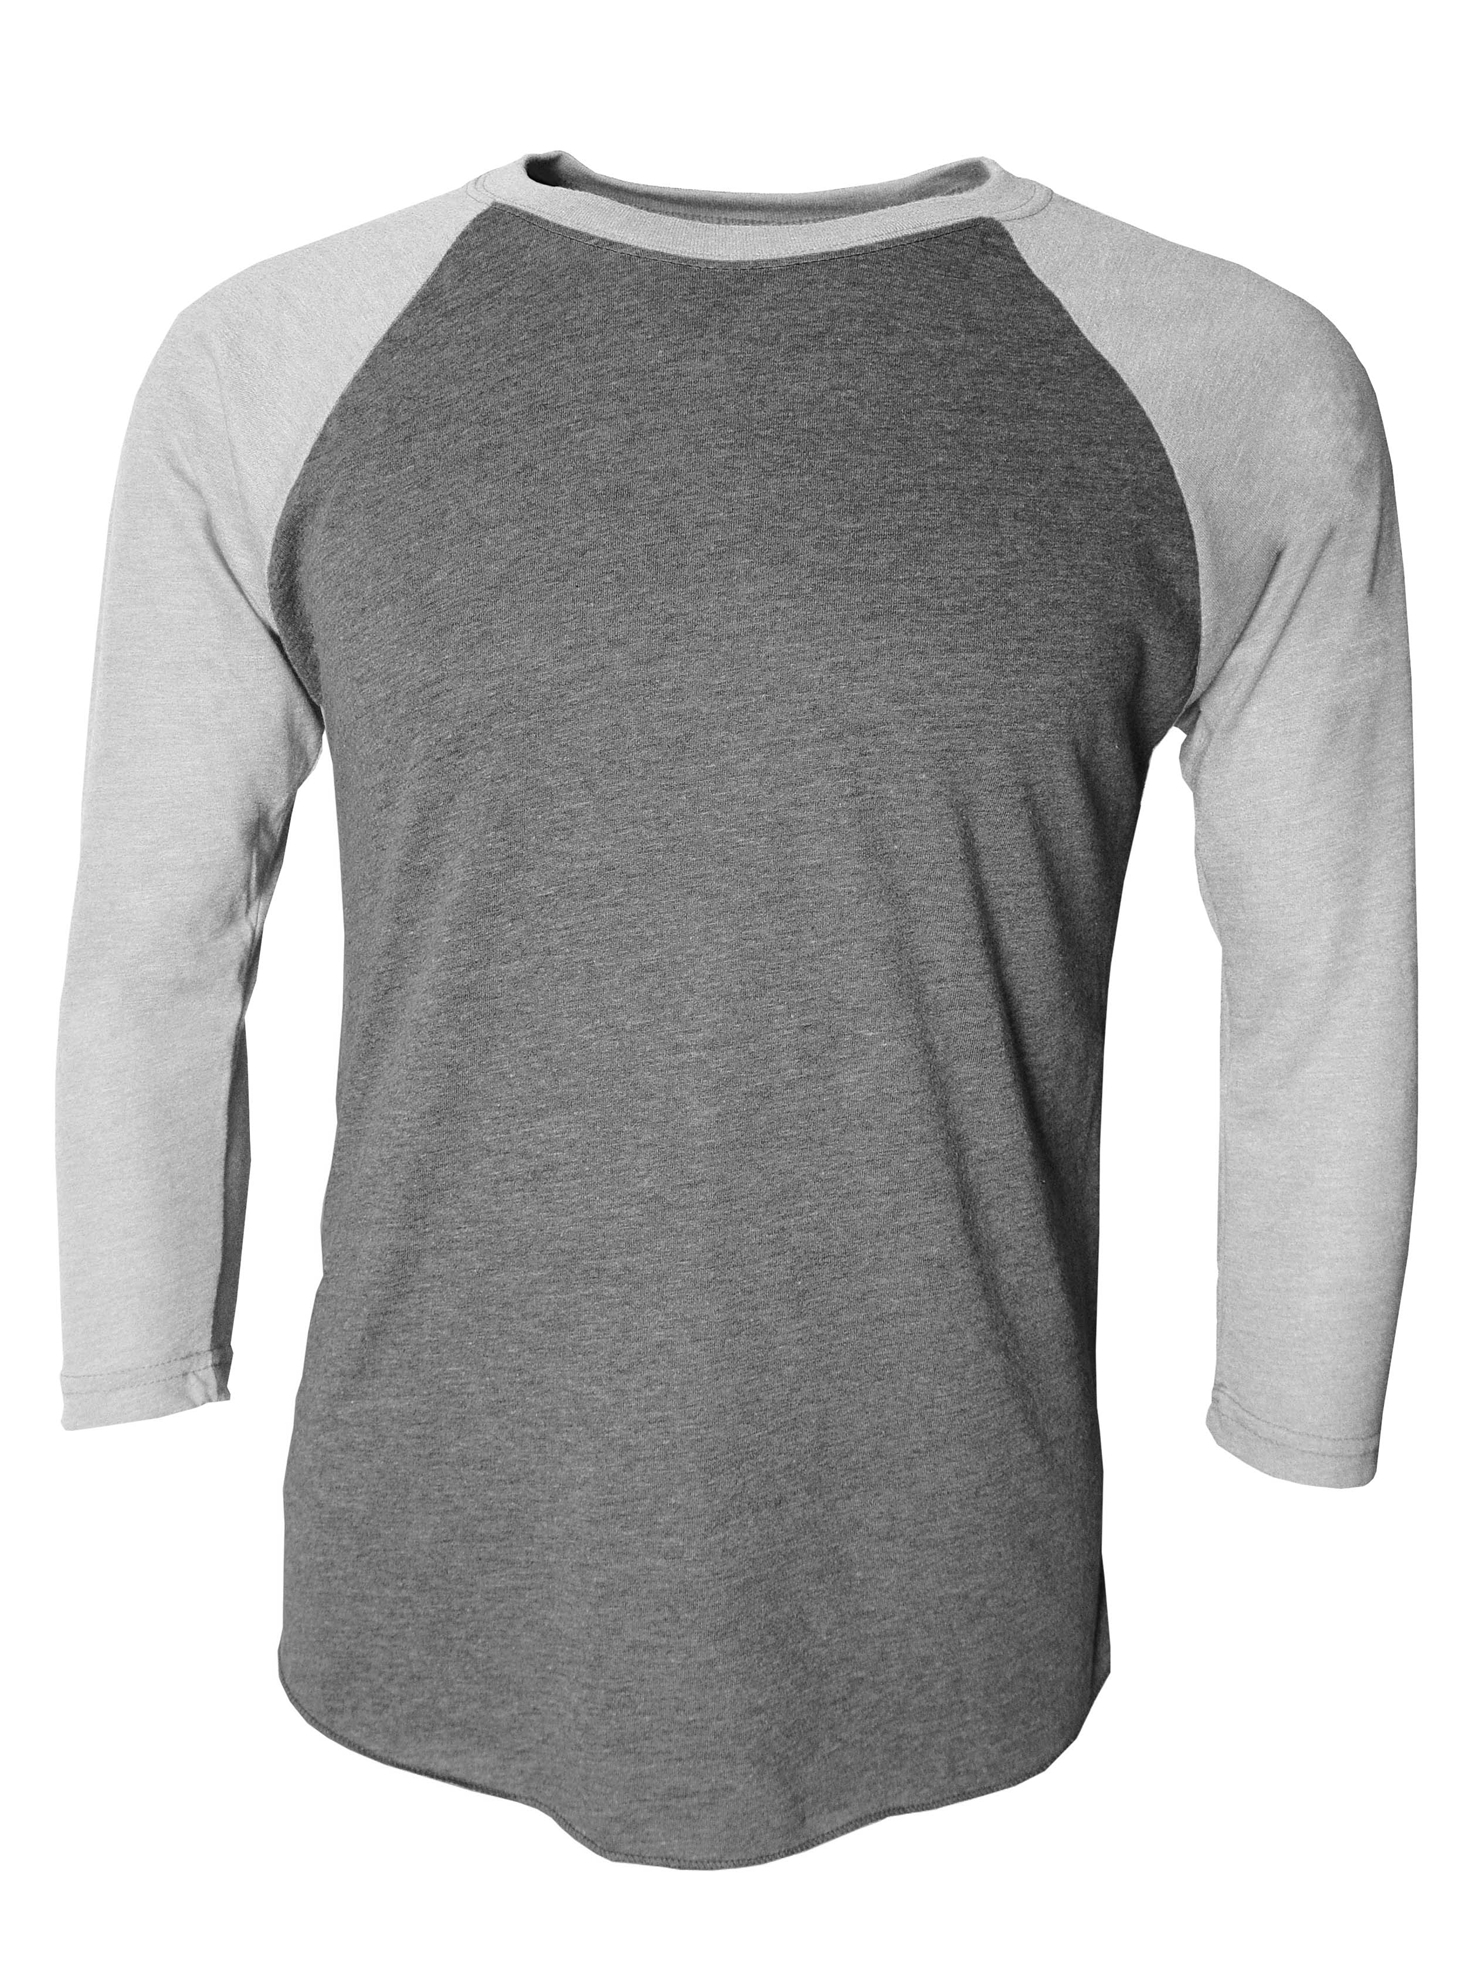 click to view SPORTS GREY/ASH